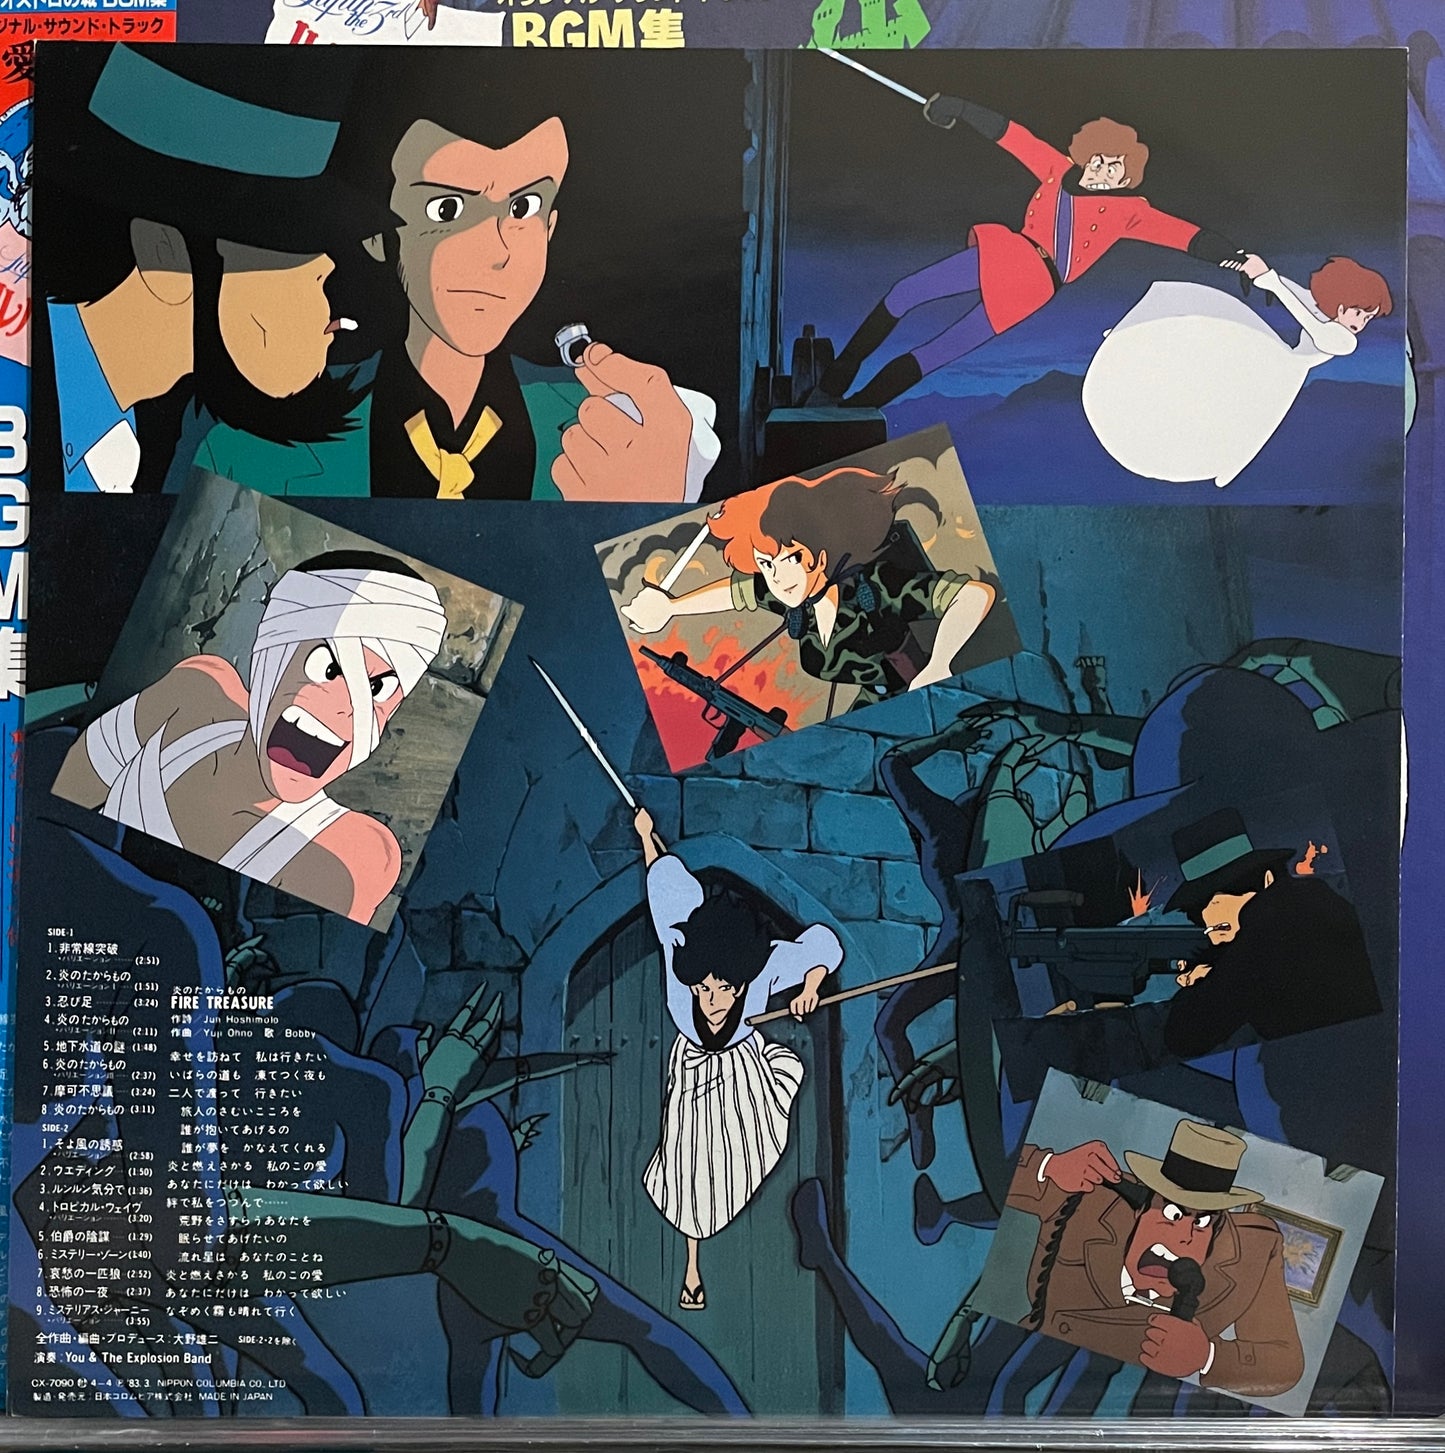 Yuji Ohno (You & The Explosion Band) “Lupin The 3rd: カリオストロの城” OST (1983)